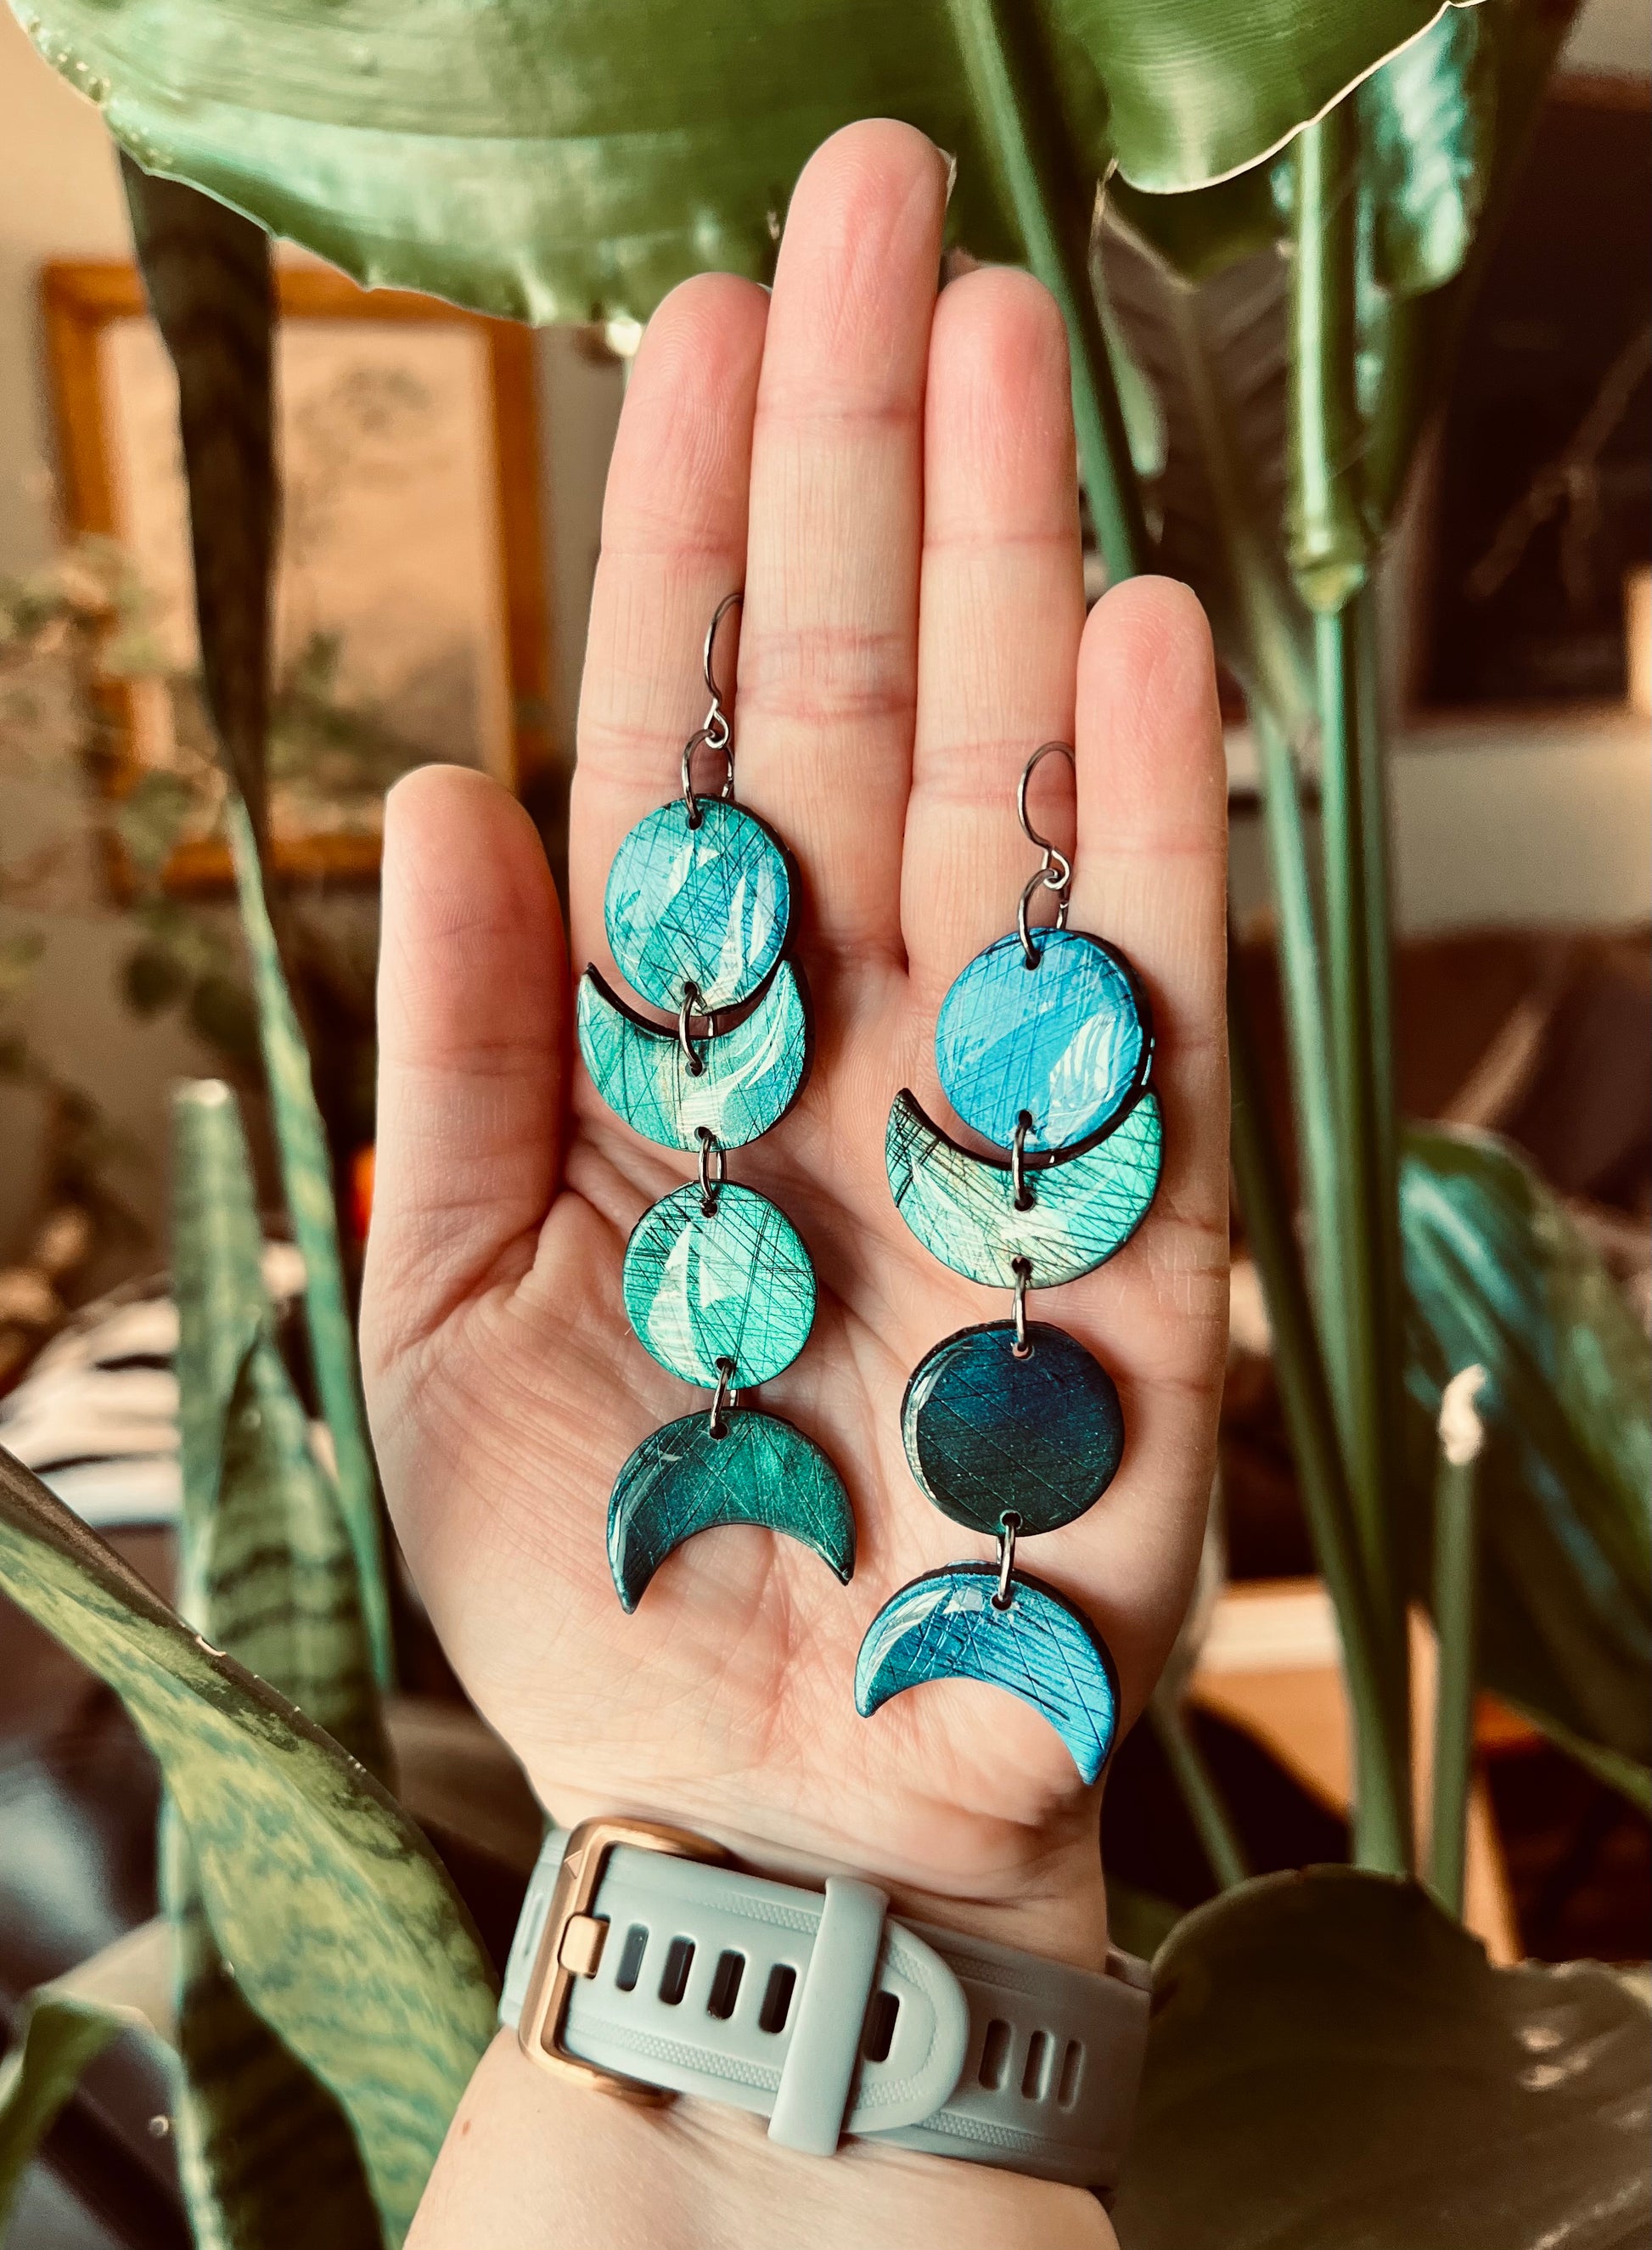 Experience the celestial allure of moon phase earrings crafted from polymer clay and mica pigments, evoking the mystical essence of labradorite. Enhance your spiritual journey with these stylish accessories.